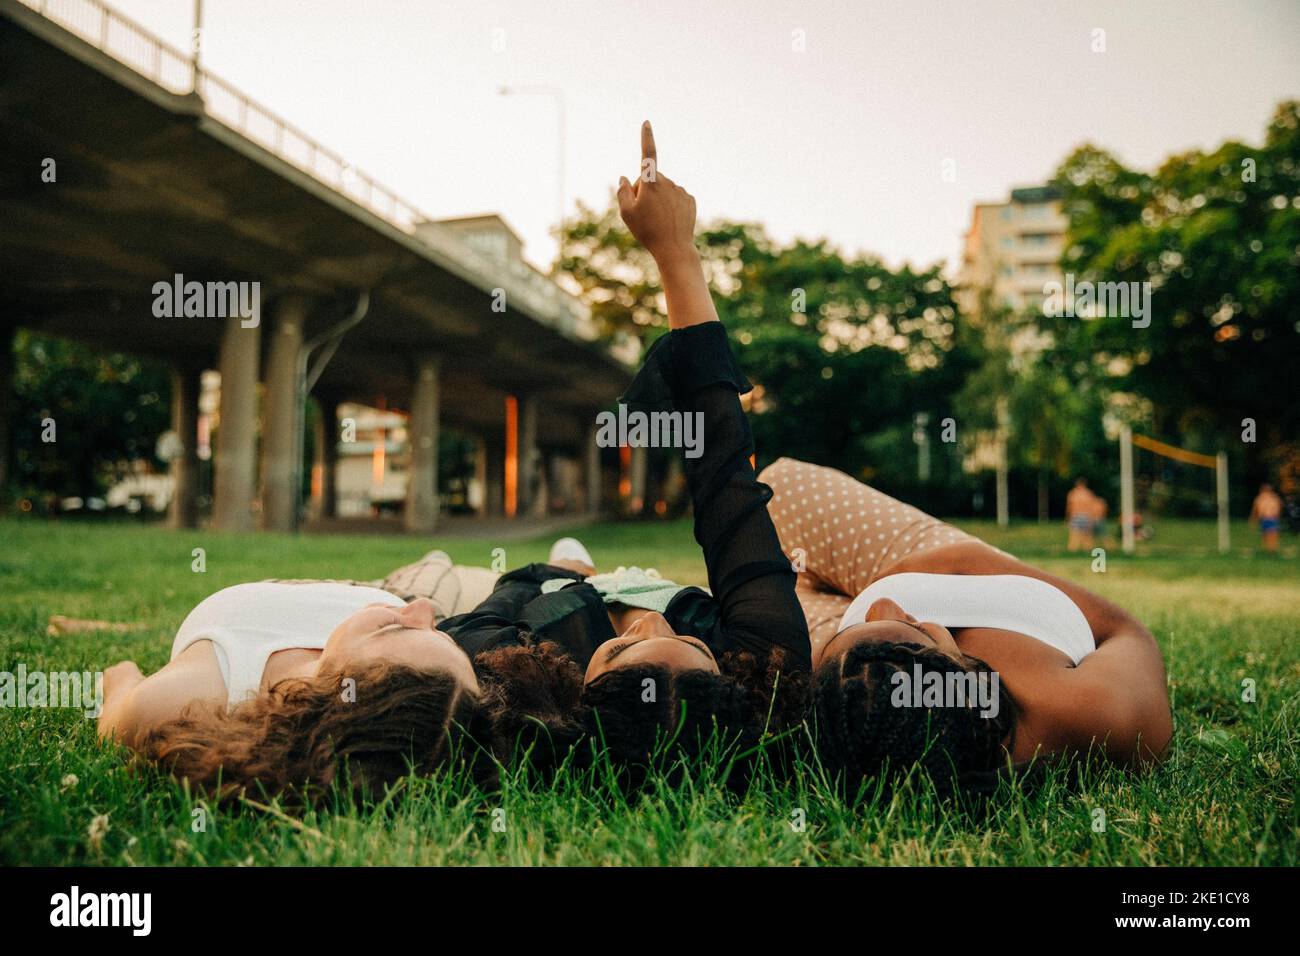 Teenage girl with hand raised pointing while lying amidst friends on grass at park Stock Photo